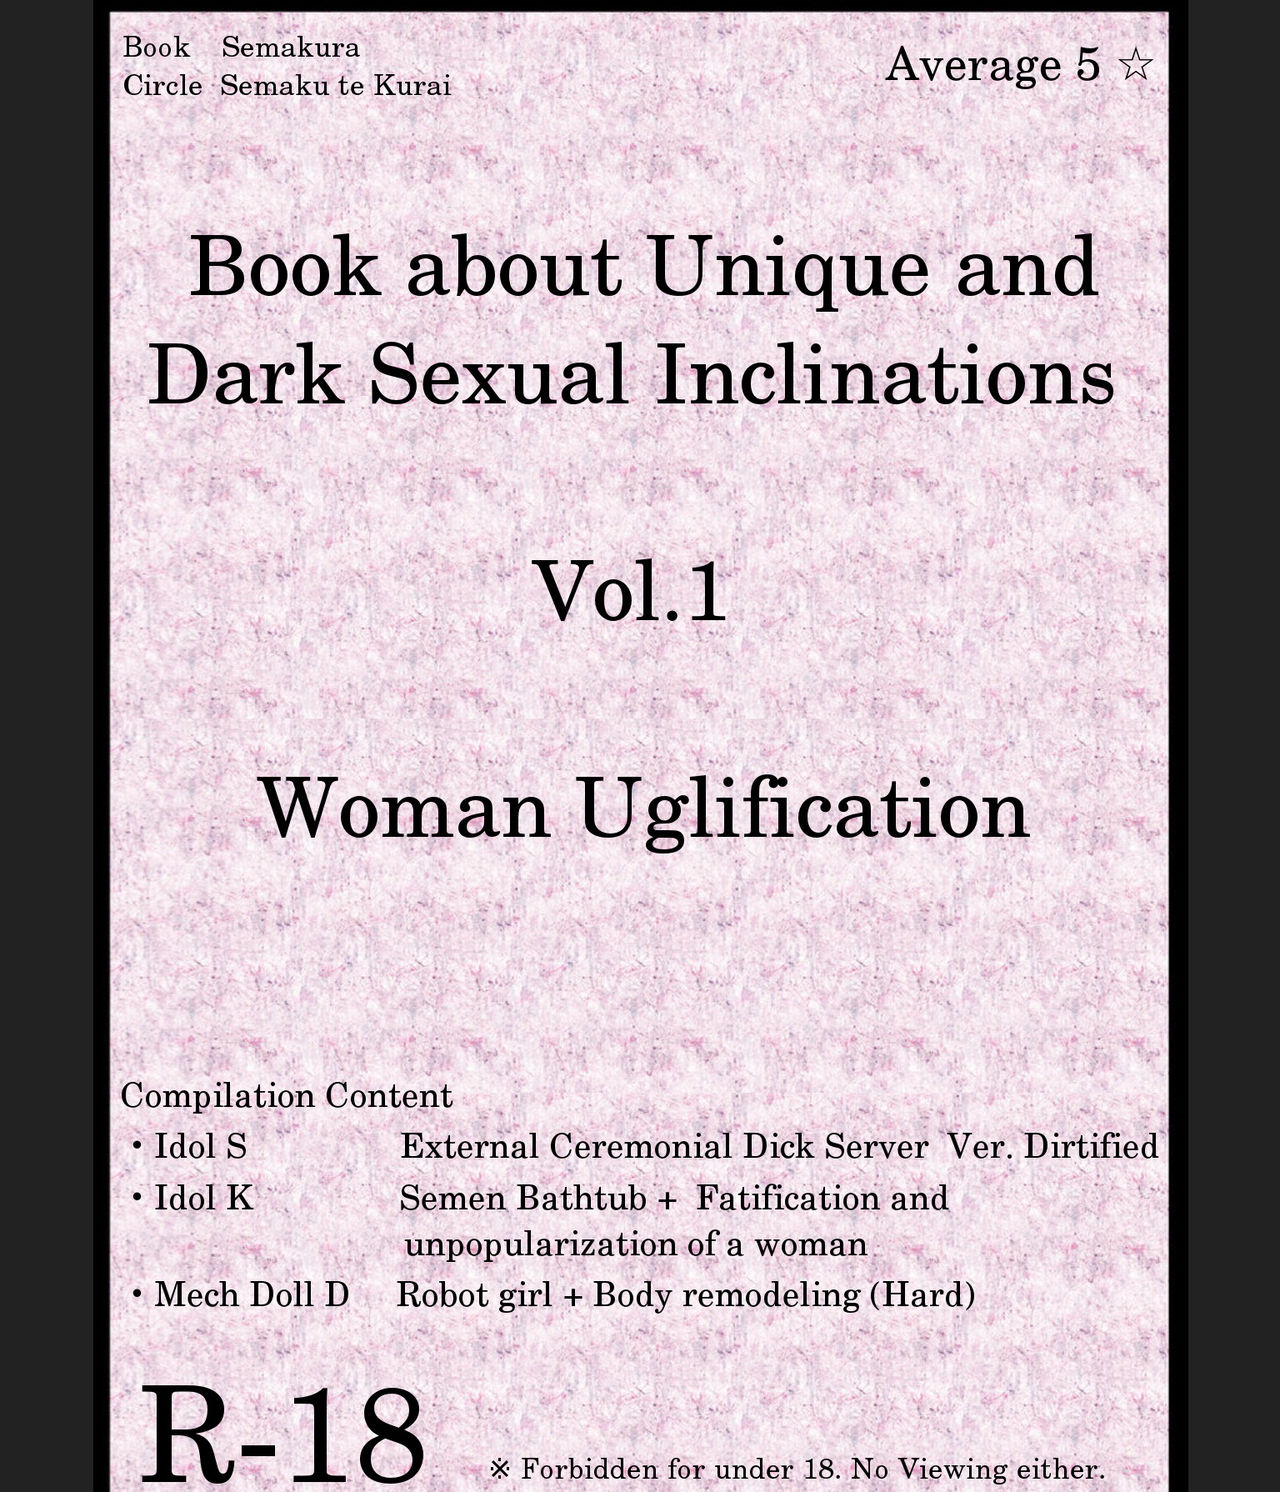 Book about Narrow and Dark Sexual Inclinations Vol.1 Uglification [English] [SMDC] page 1 full